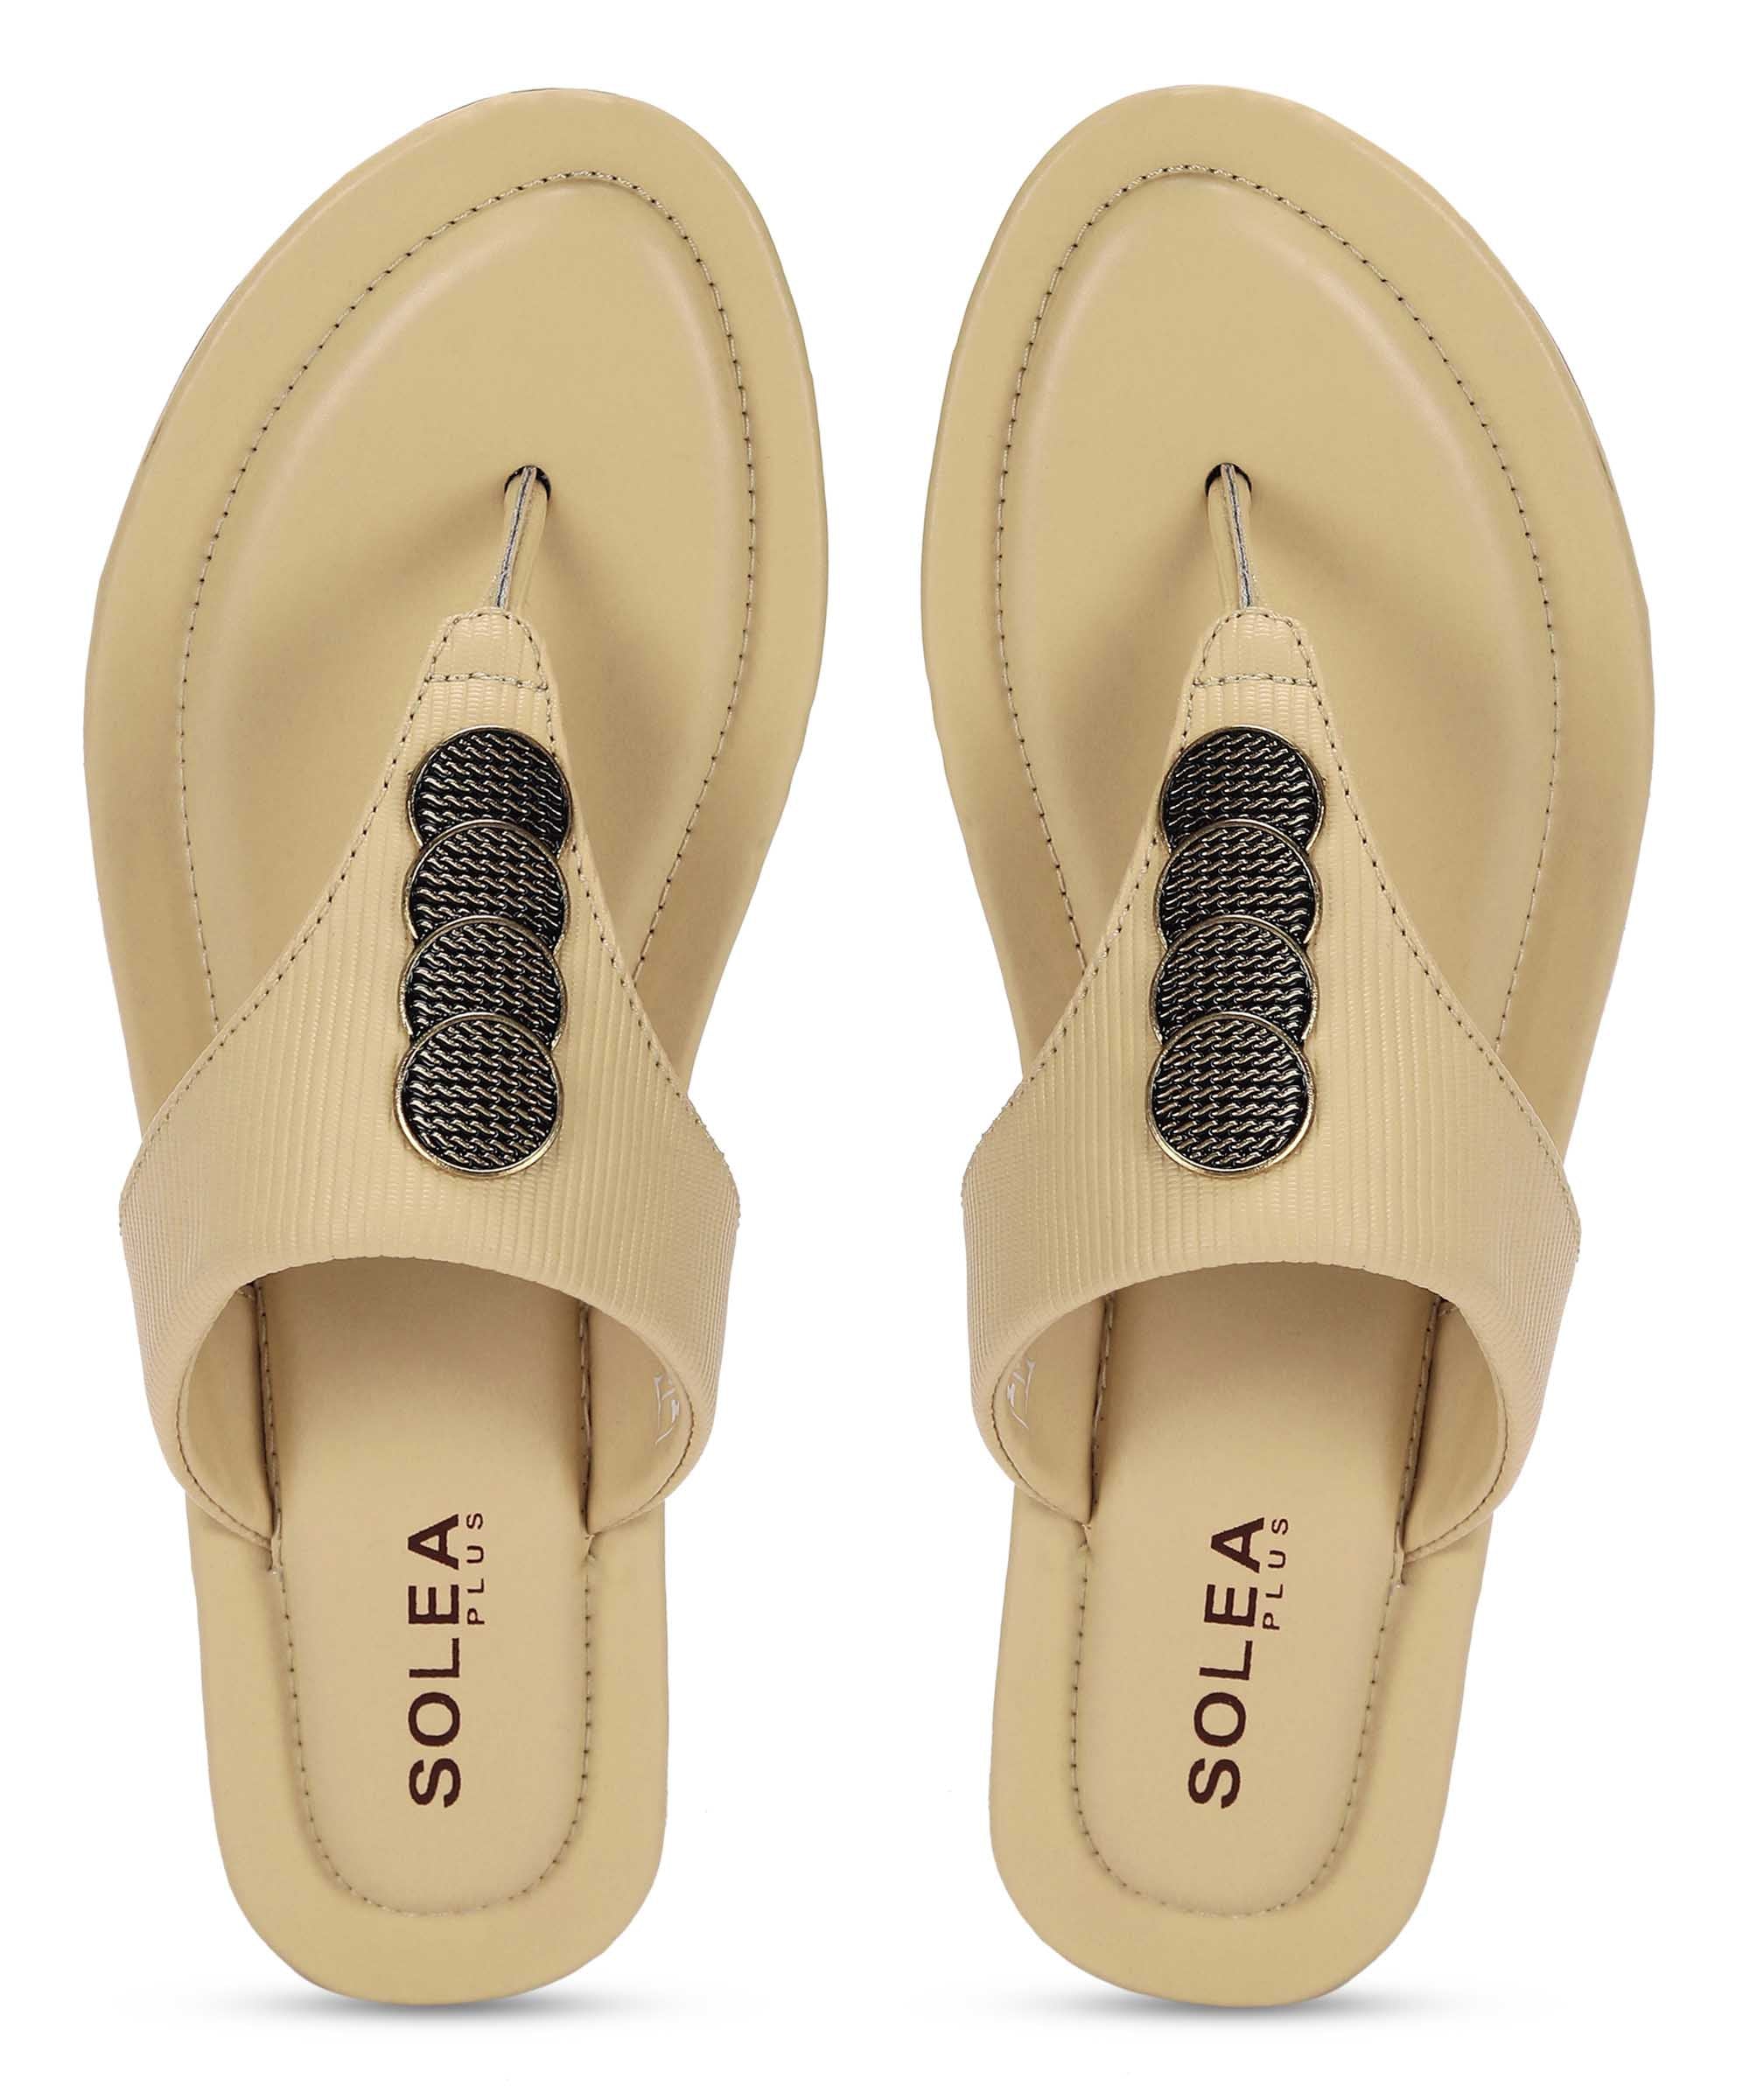 Paragon K6015L Women Sandals | Casual &amp; Formal Sandals | Stylish, Comfortable &amp; Durable | For Daily &amp; Occasion Wear